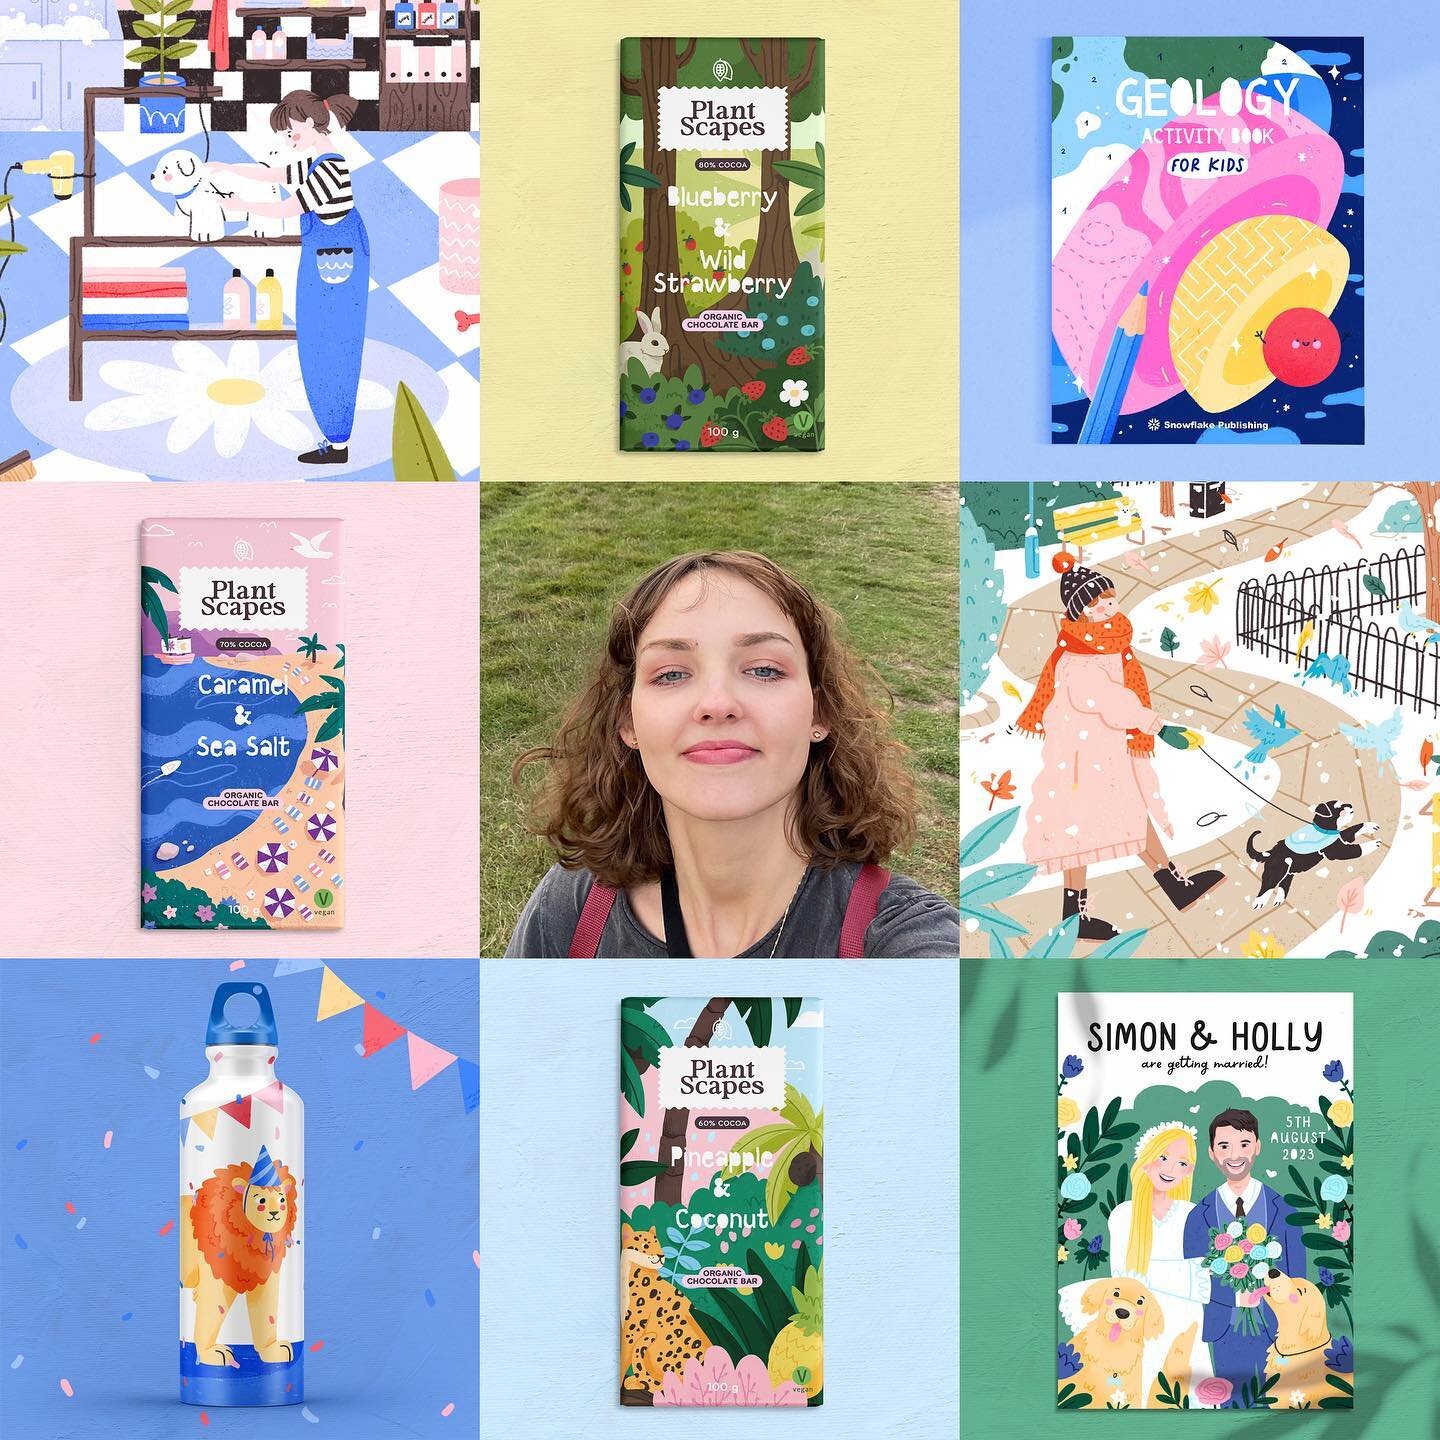 #artvsartist 2023 😄

Wishing you all a lovely Christmas break🎄⭐️ and thank you for sticking around this year! ❤️

#artvsartist2023 #illustrator #illustration